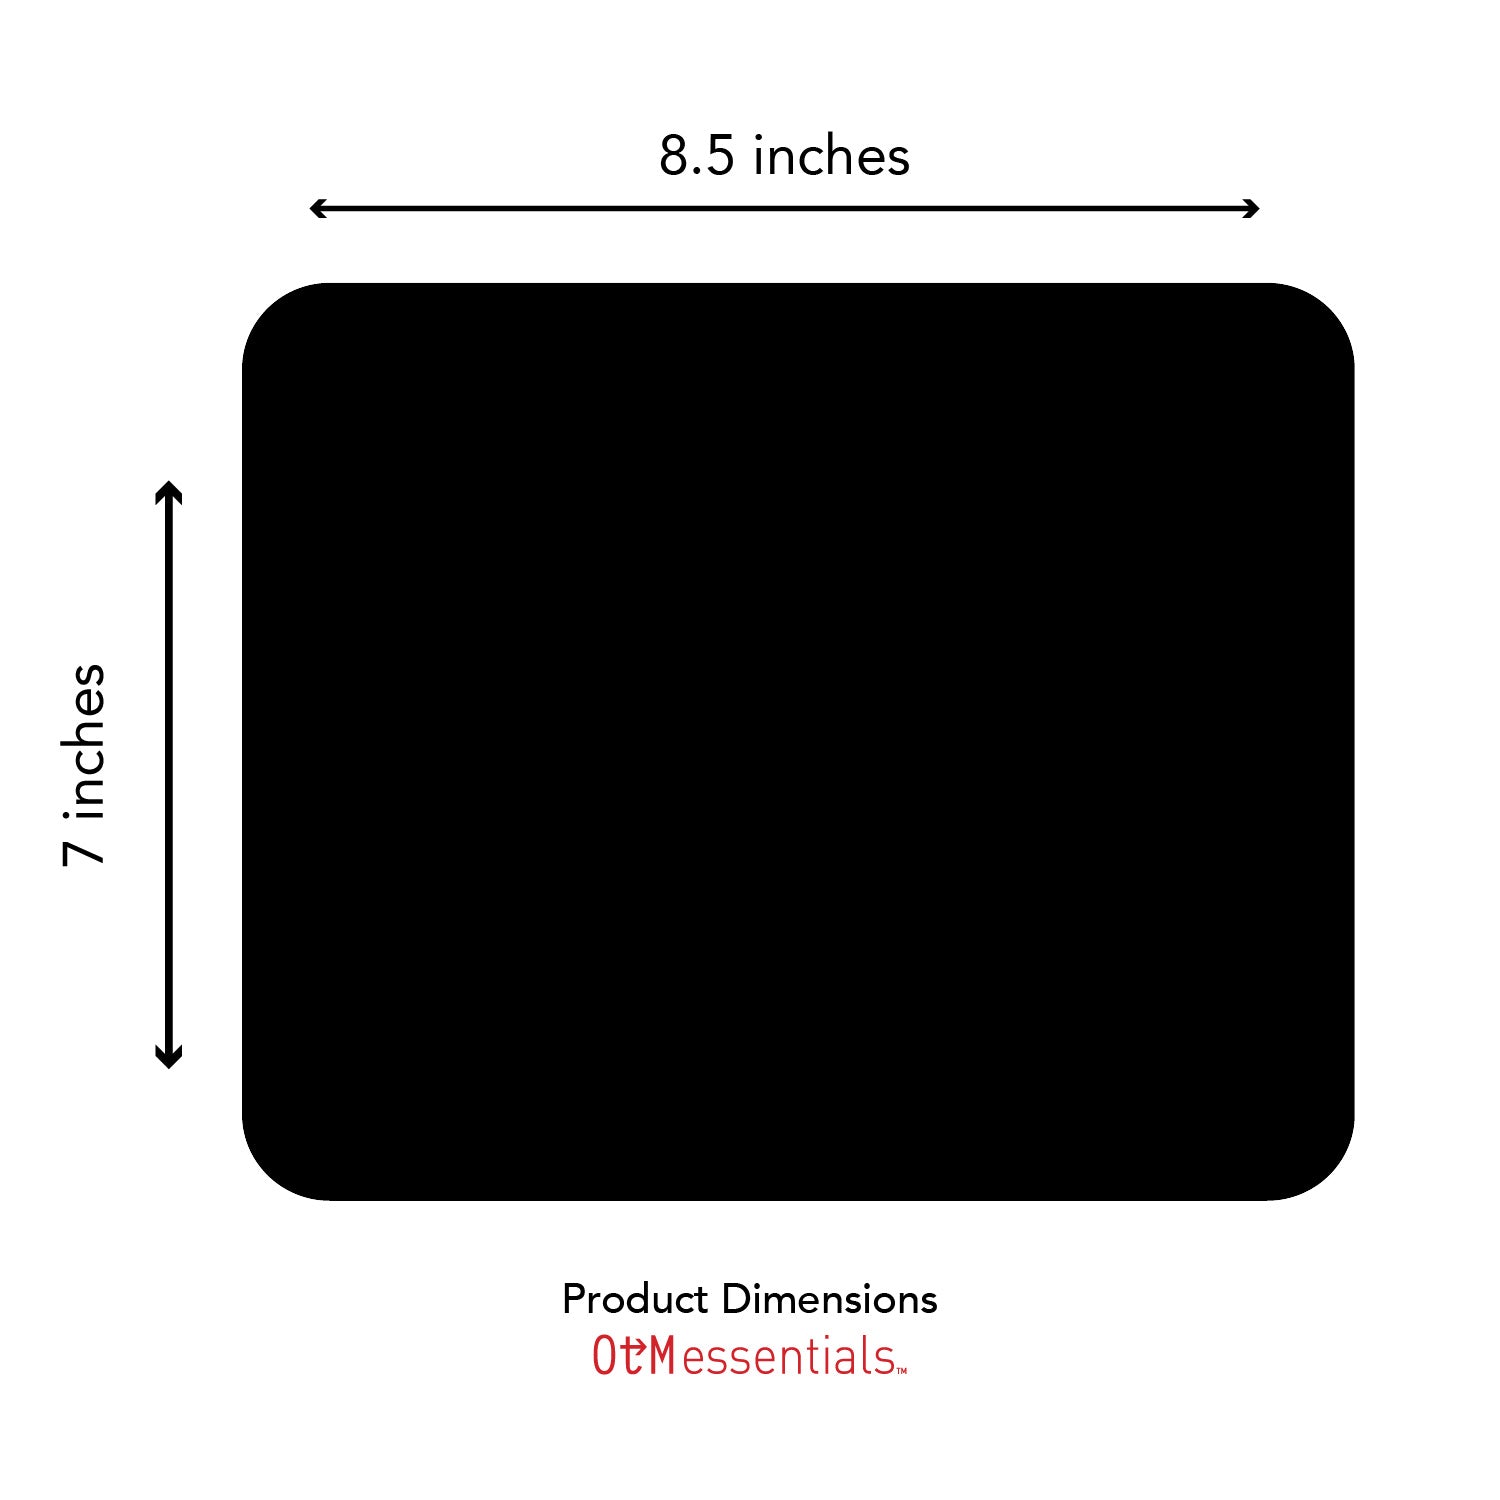 OC-OHS2-MH39A, Product Dimensions